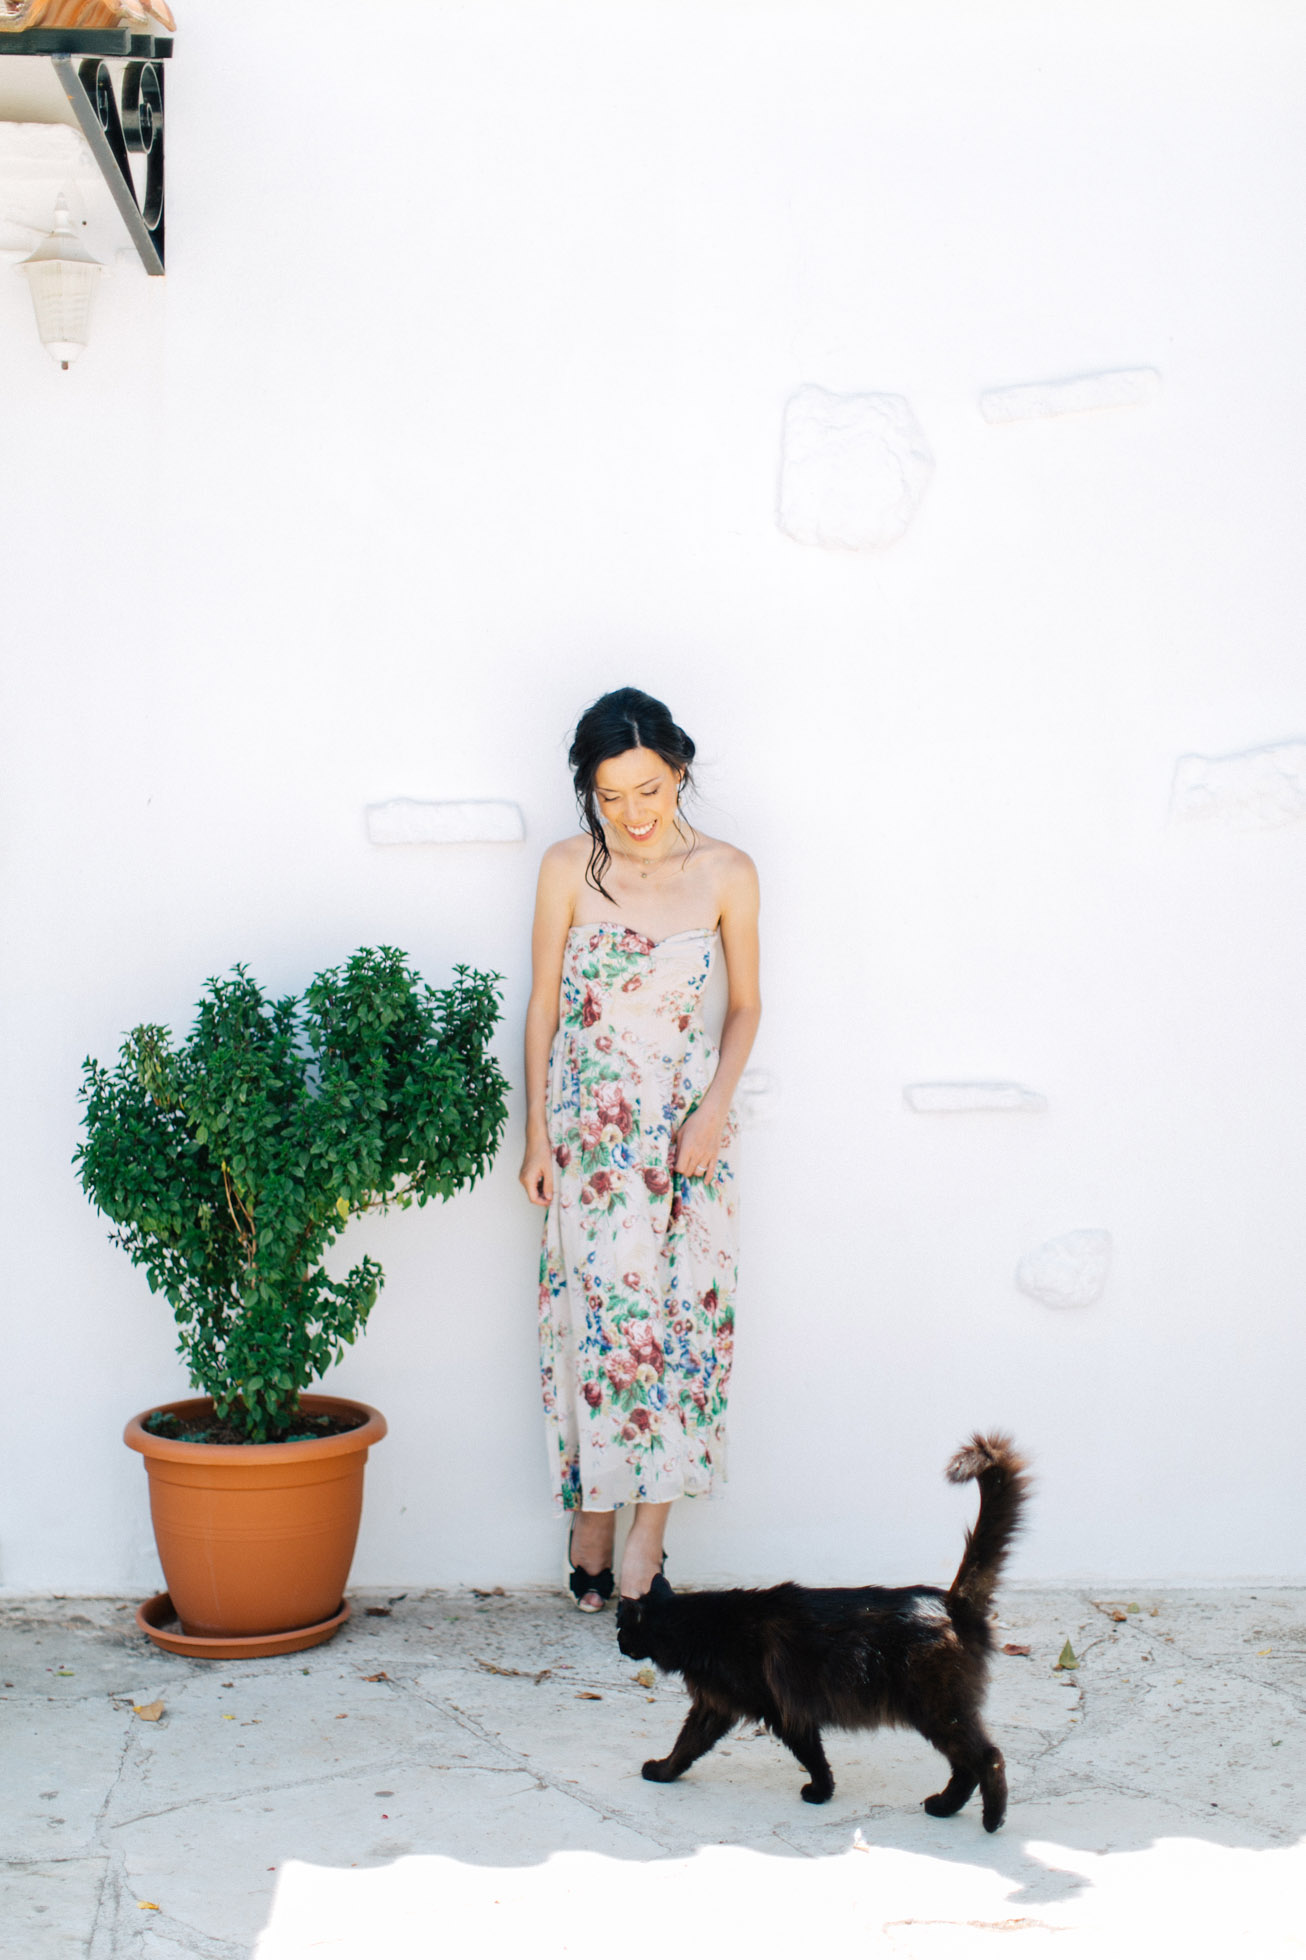 Young elegant woman wearing summer dress and elegant makeup is posing for her elopemement portraits for professional photographer team in Crete island, Greece. Colorful garden and park backdrop adds to the happy and vibrant feel of this session.